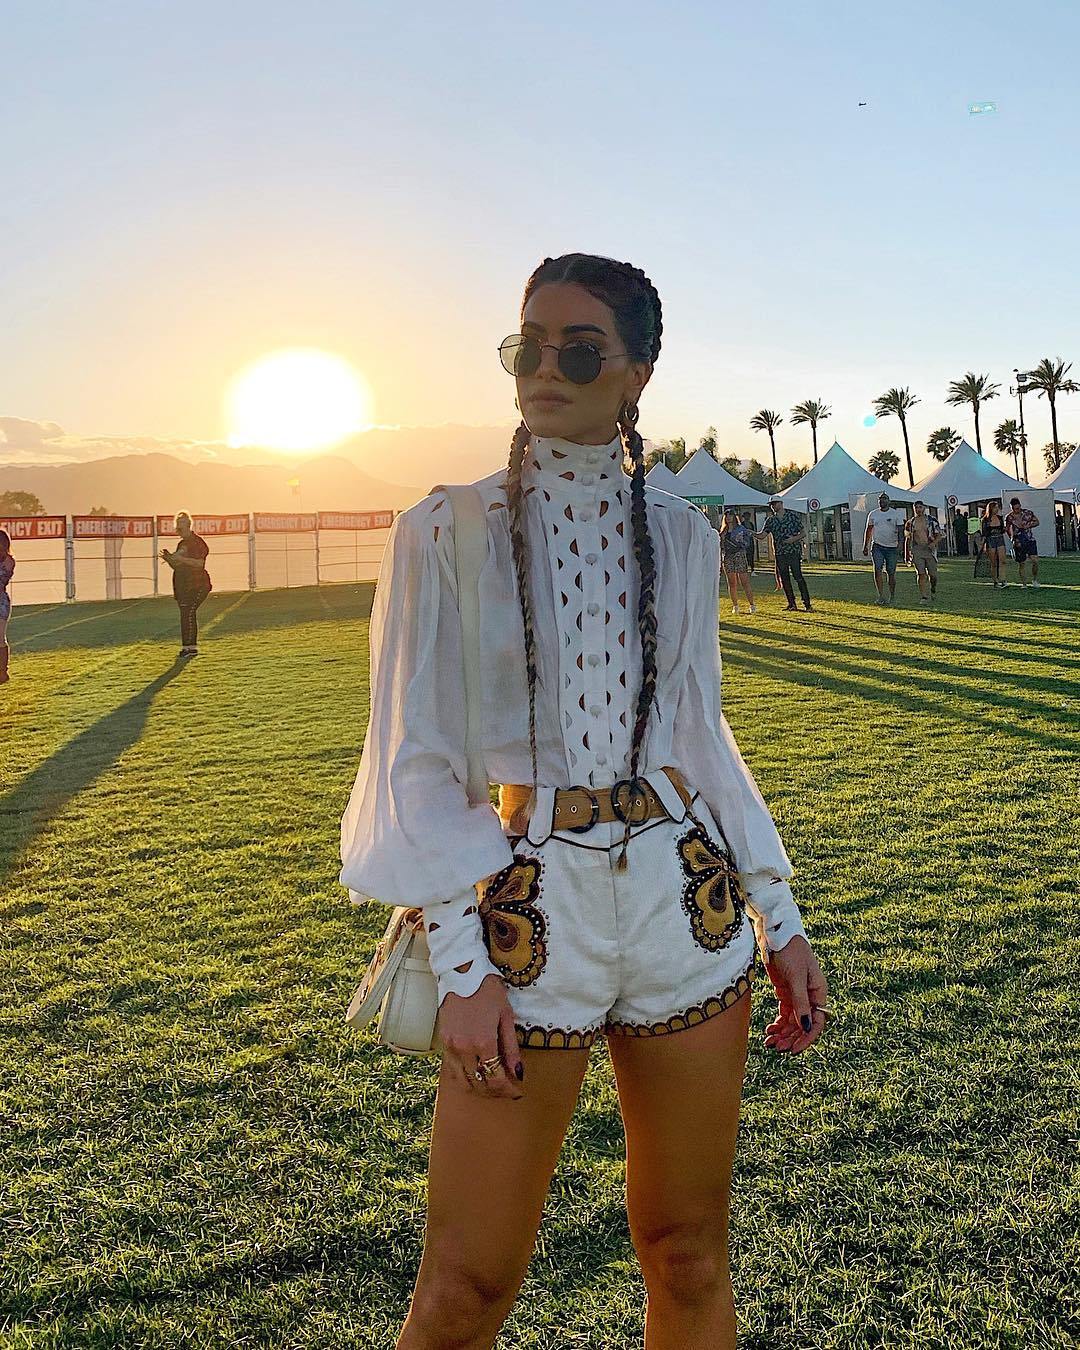 Bought a new outfit for Coachella? You won't be wearing it in 2021